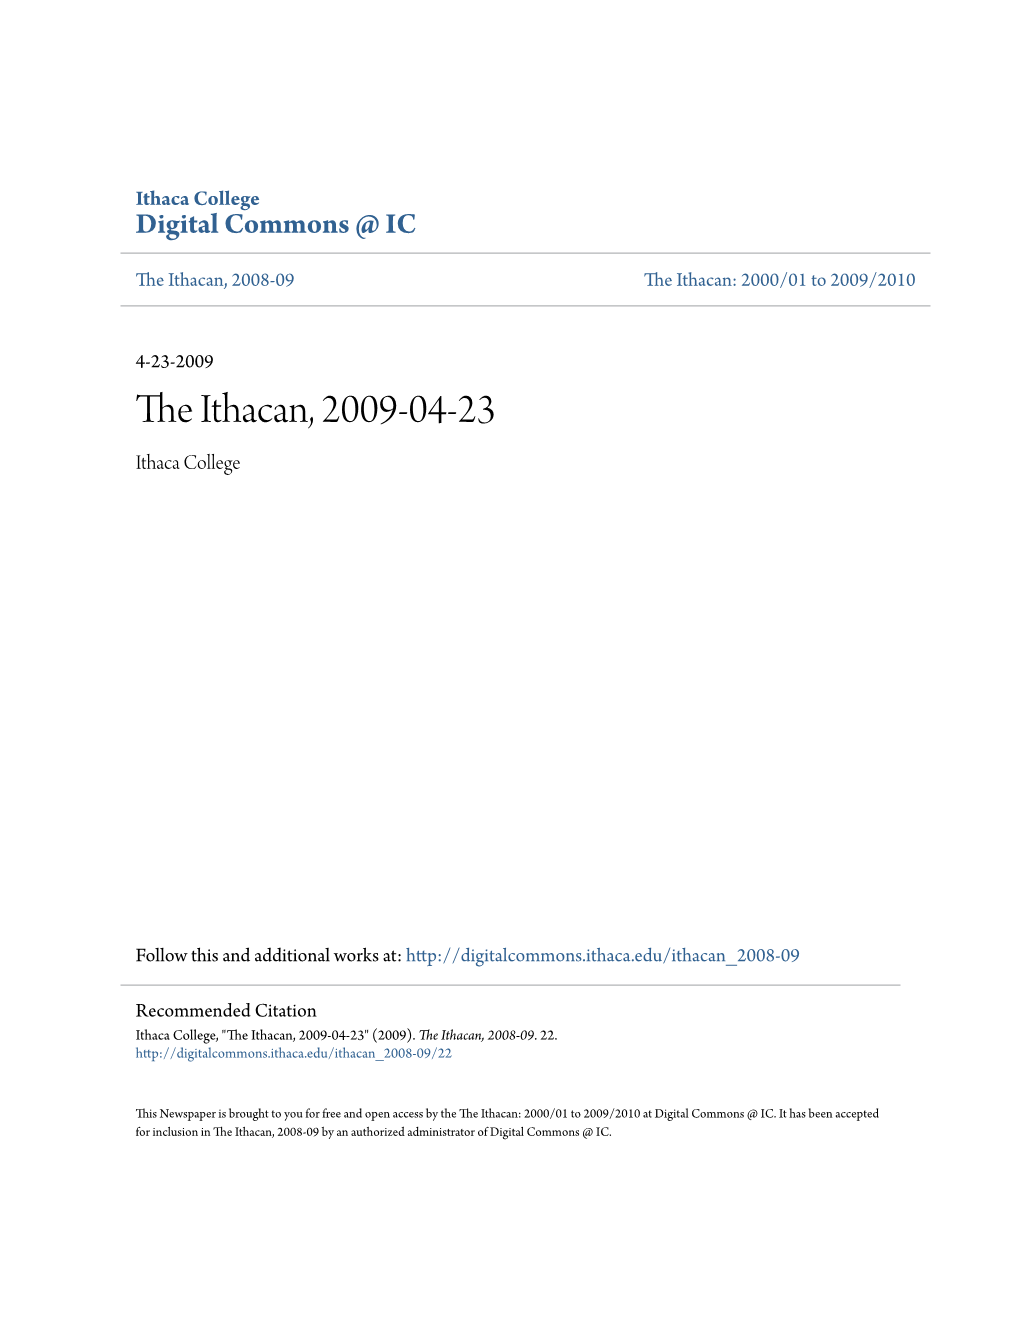 The Ithacan, 2009-04-23